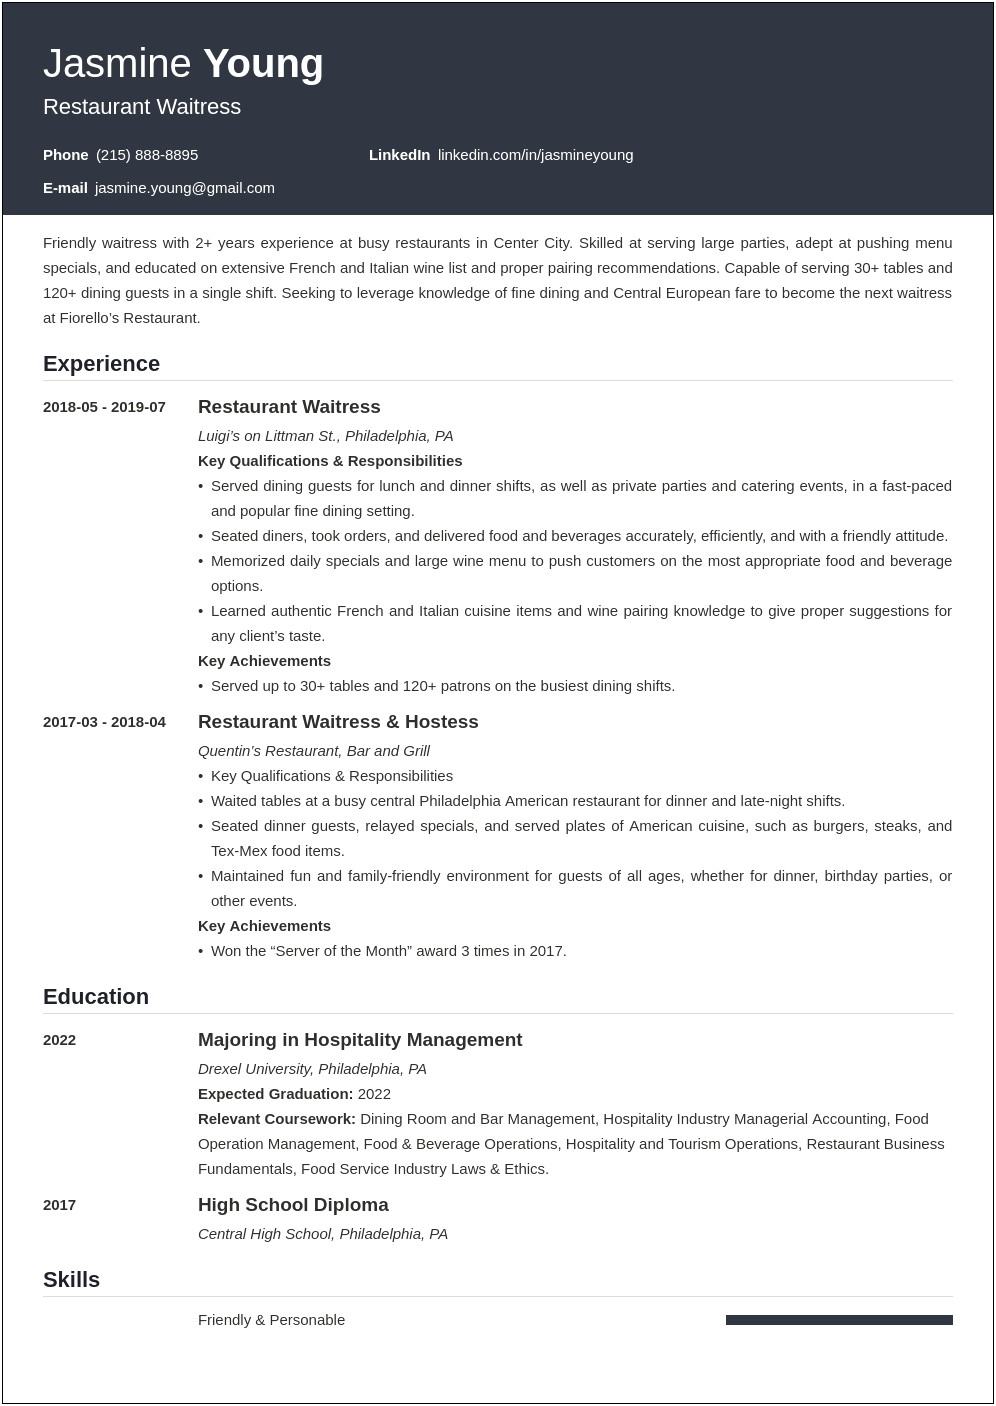 Resume Fast Food Restaurant No Experience